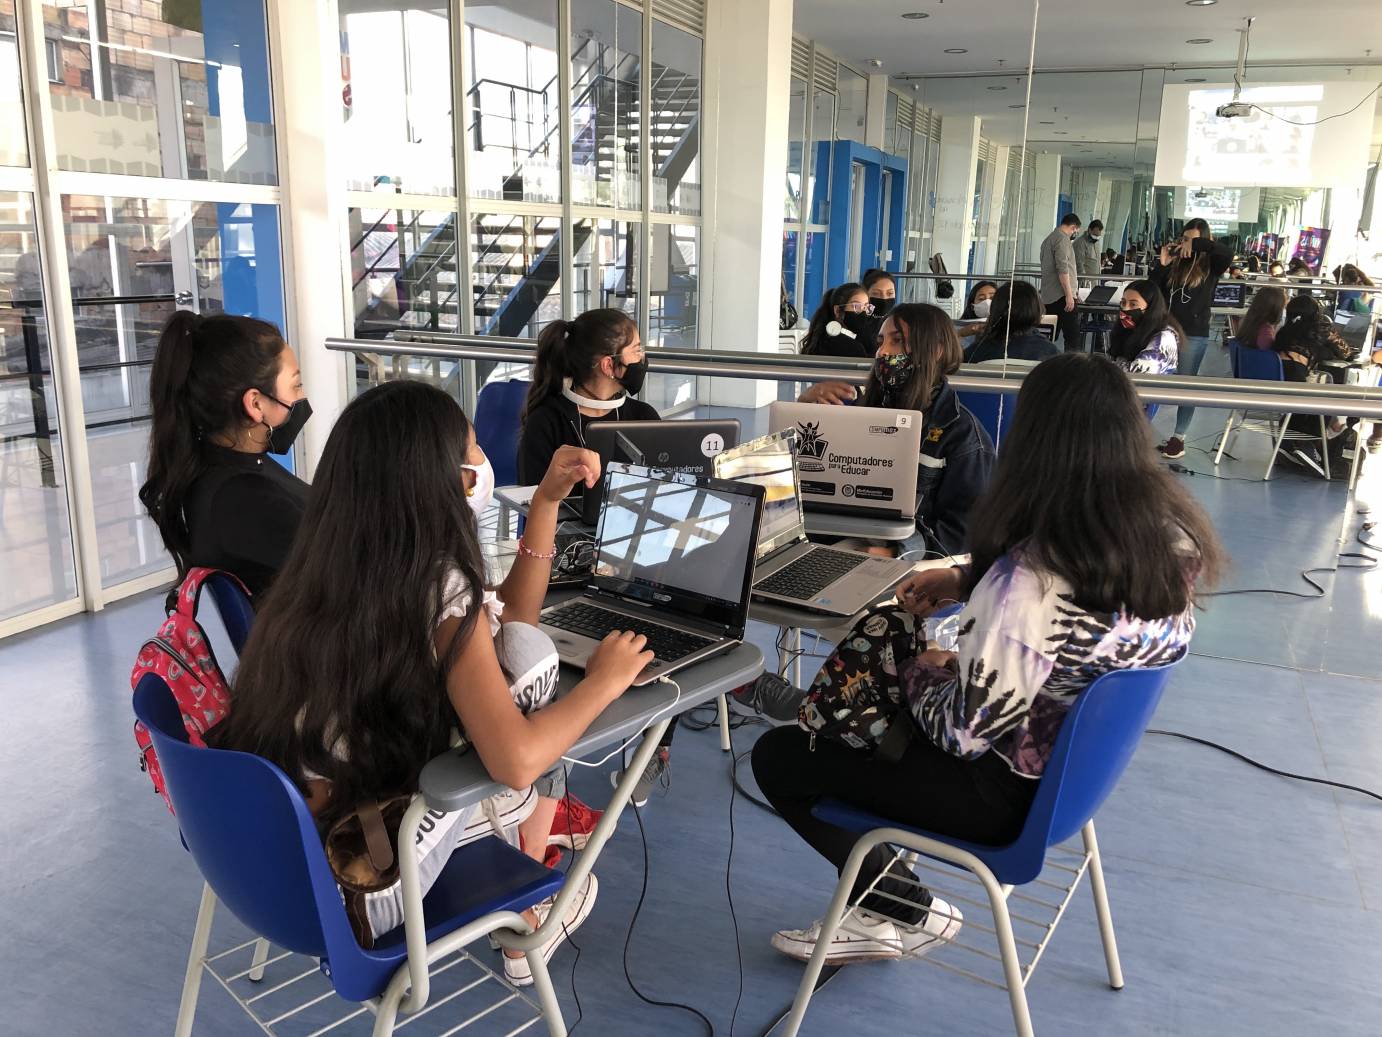 Girls gather around a desk with laptops as part of Vive Bailando's STEM and dance initiative